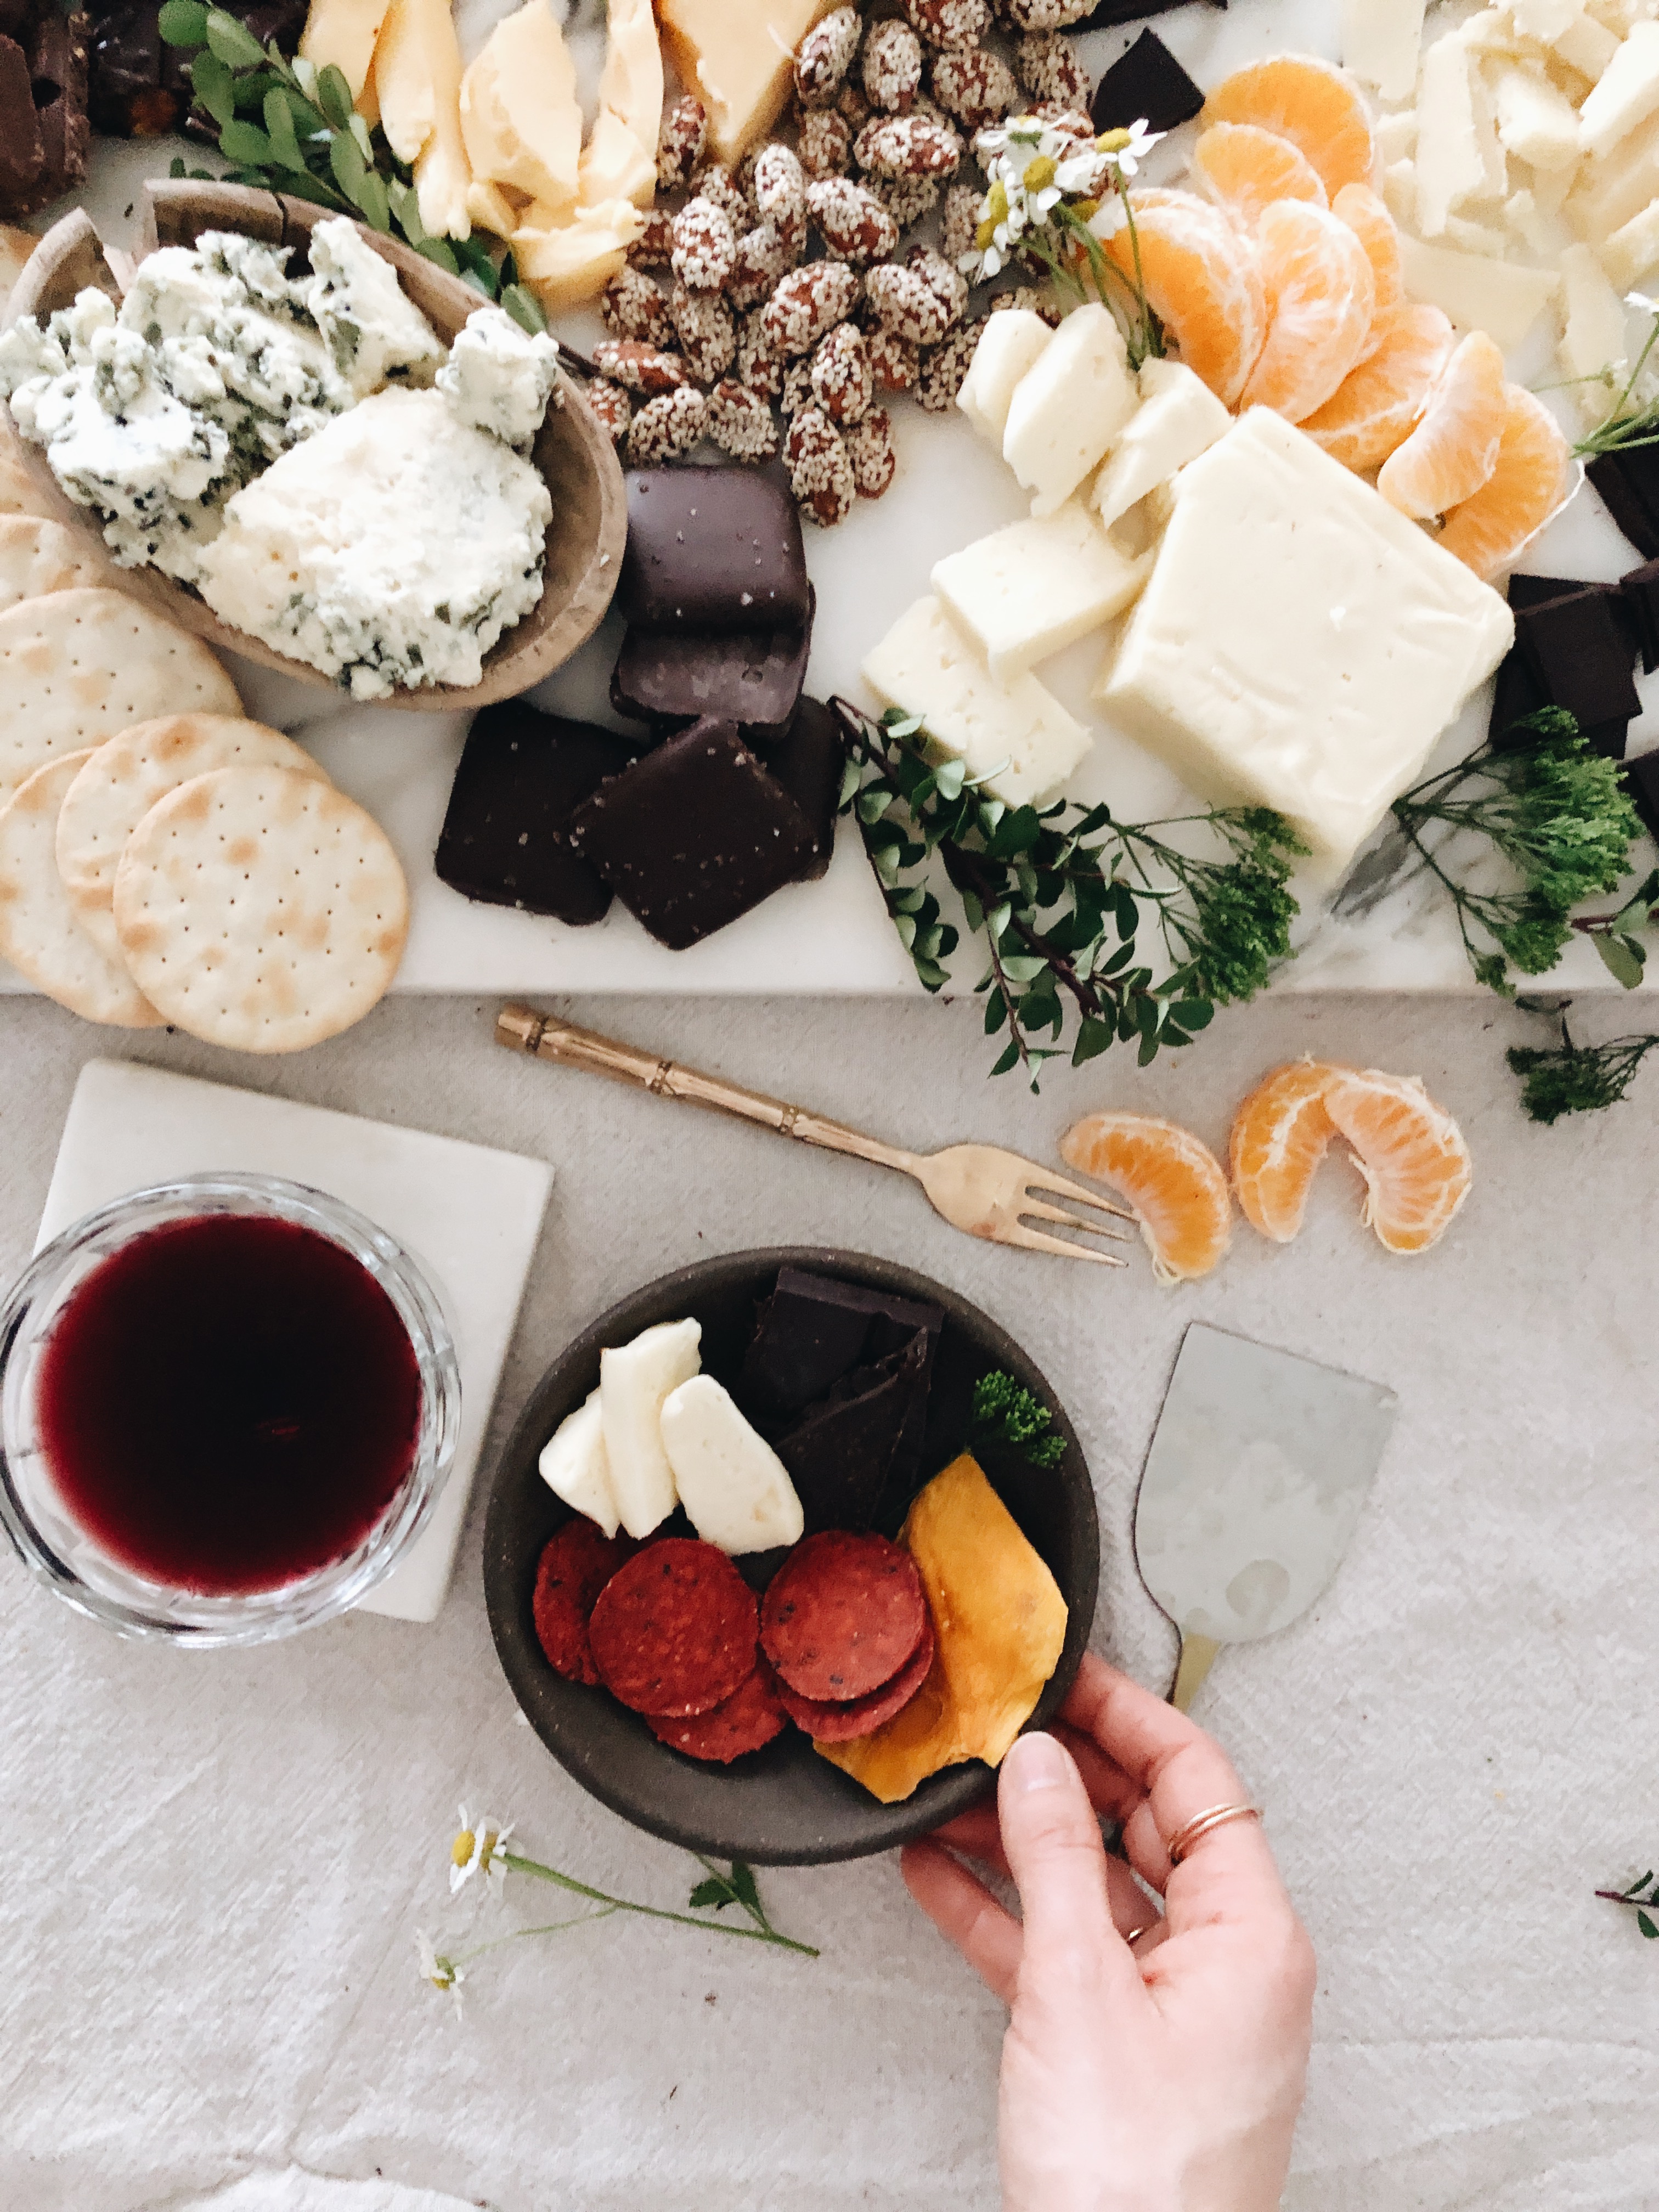 Chocolate, Cheese and Wine - Oh My! / Bev Cooks